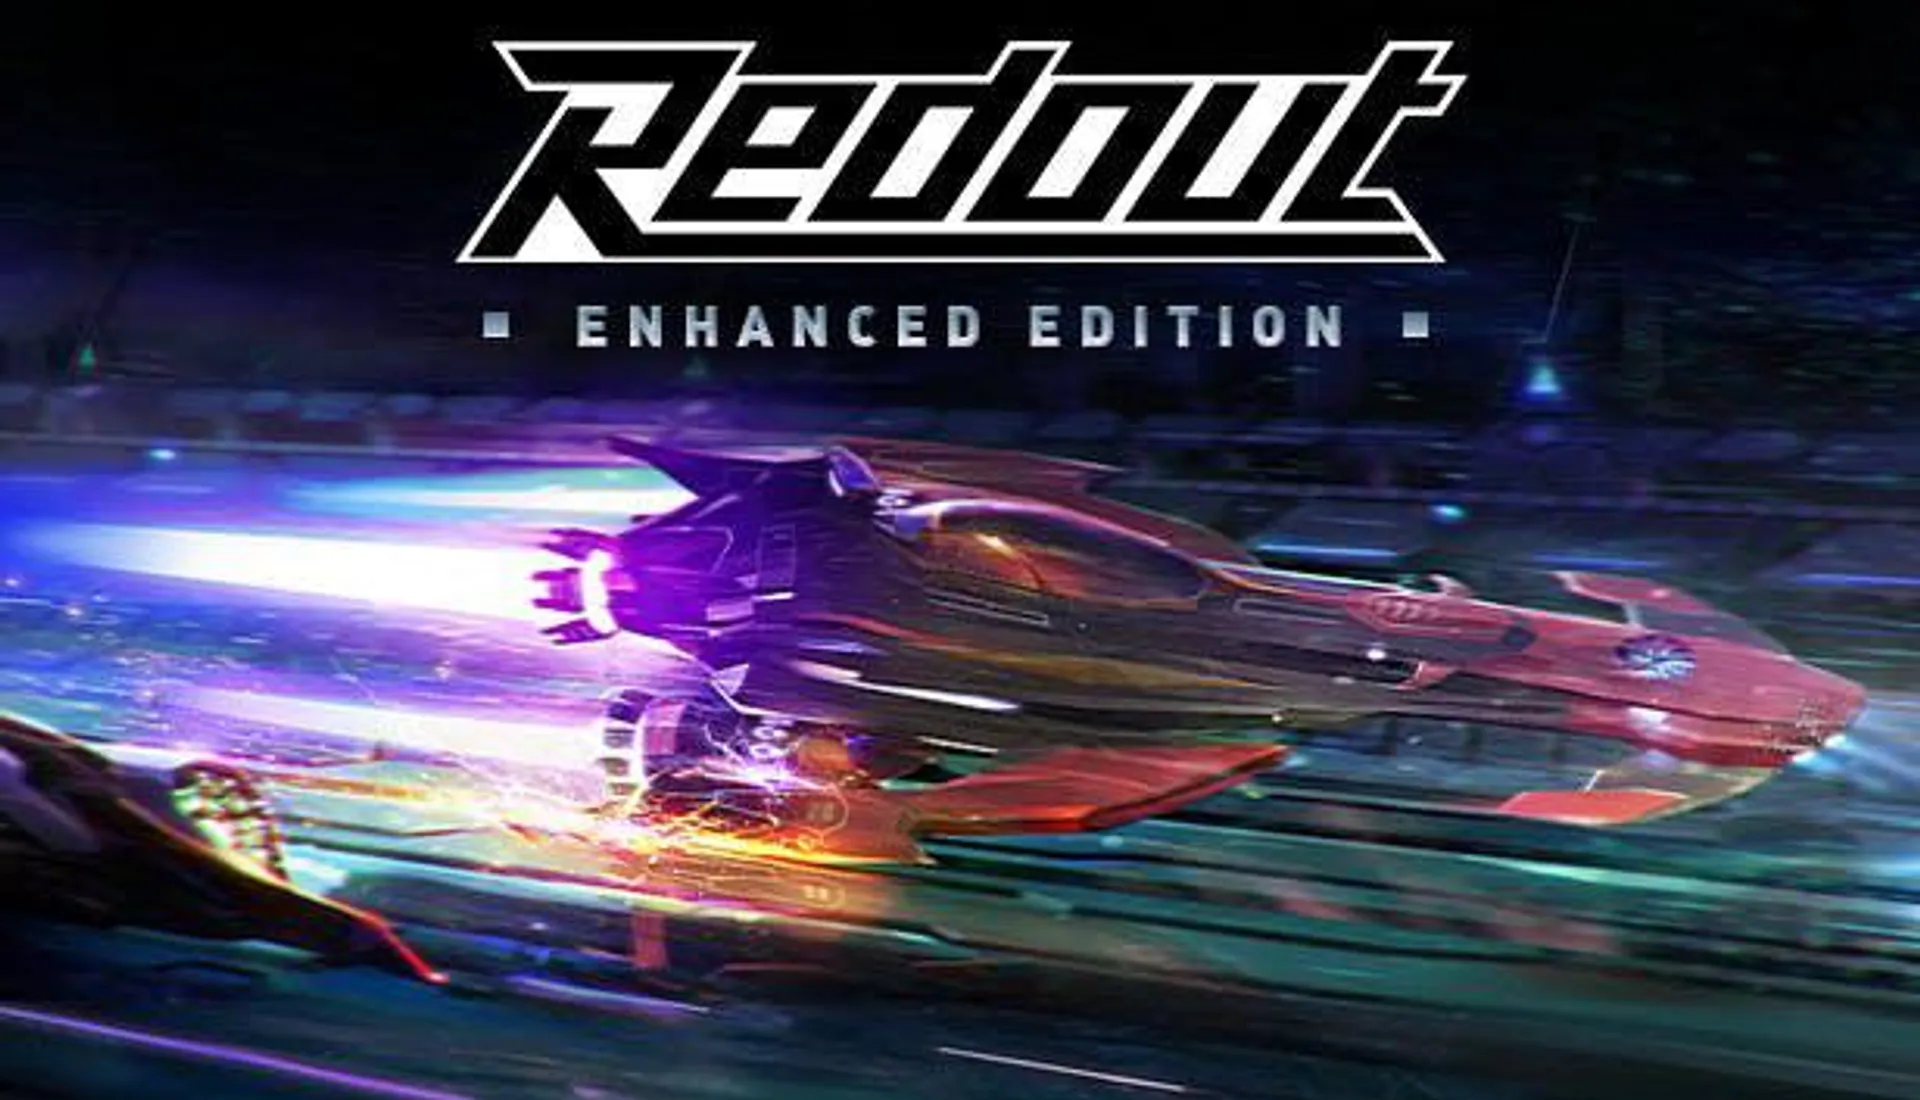 Redout: Enchanced Edition